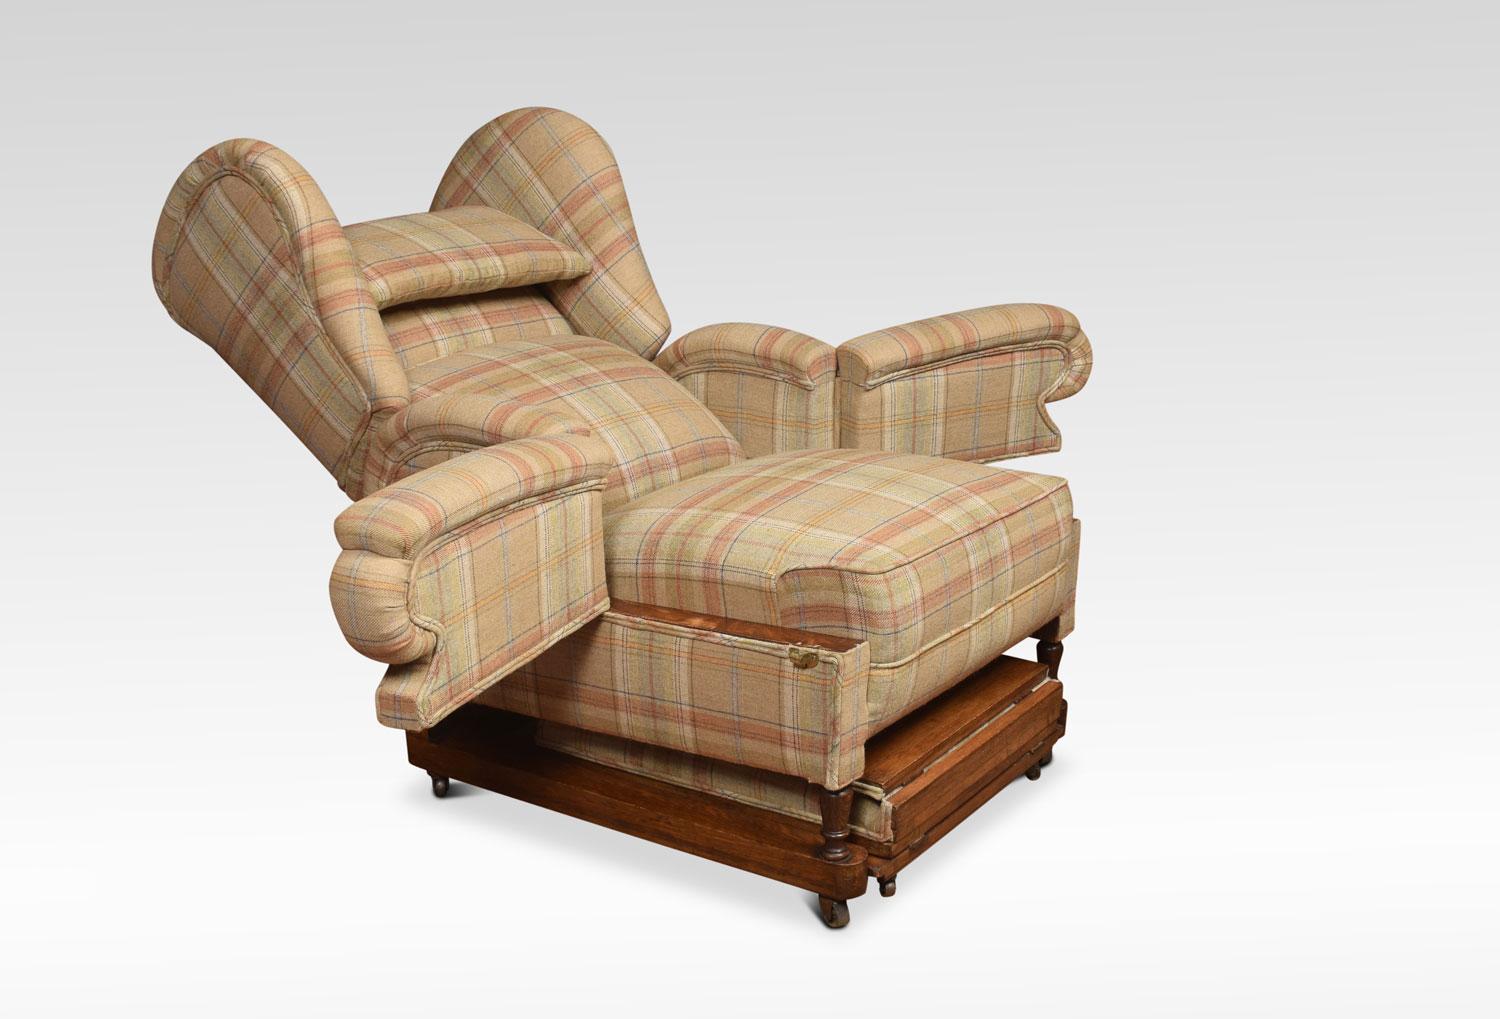 19th century wing armchair, the shaped reclining back above large movable arm rests, leading down to fully adjustable stool, Upholstered in tartan fabric. Raised on four tuned legs terminating in castors.
Dimensions:
Height 48 inches height to